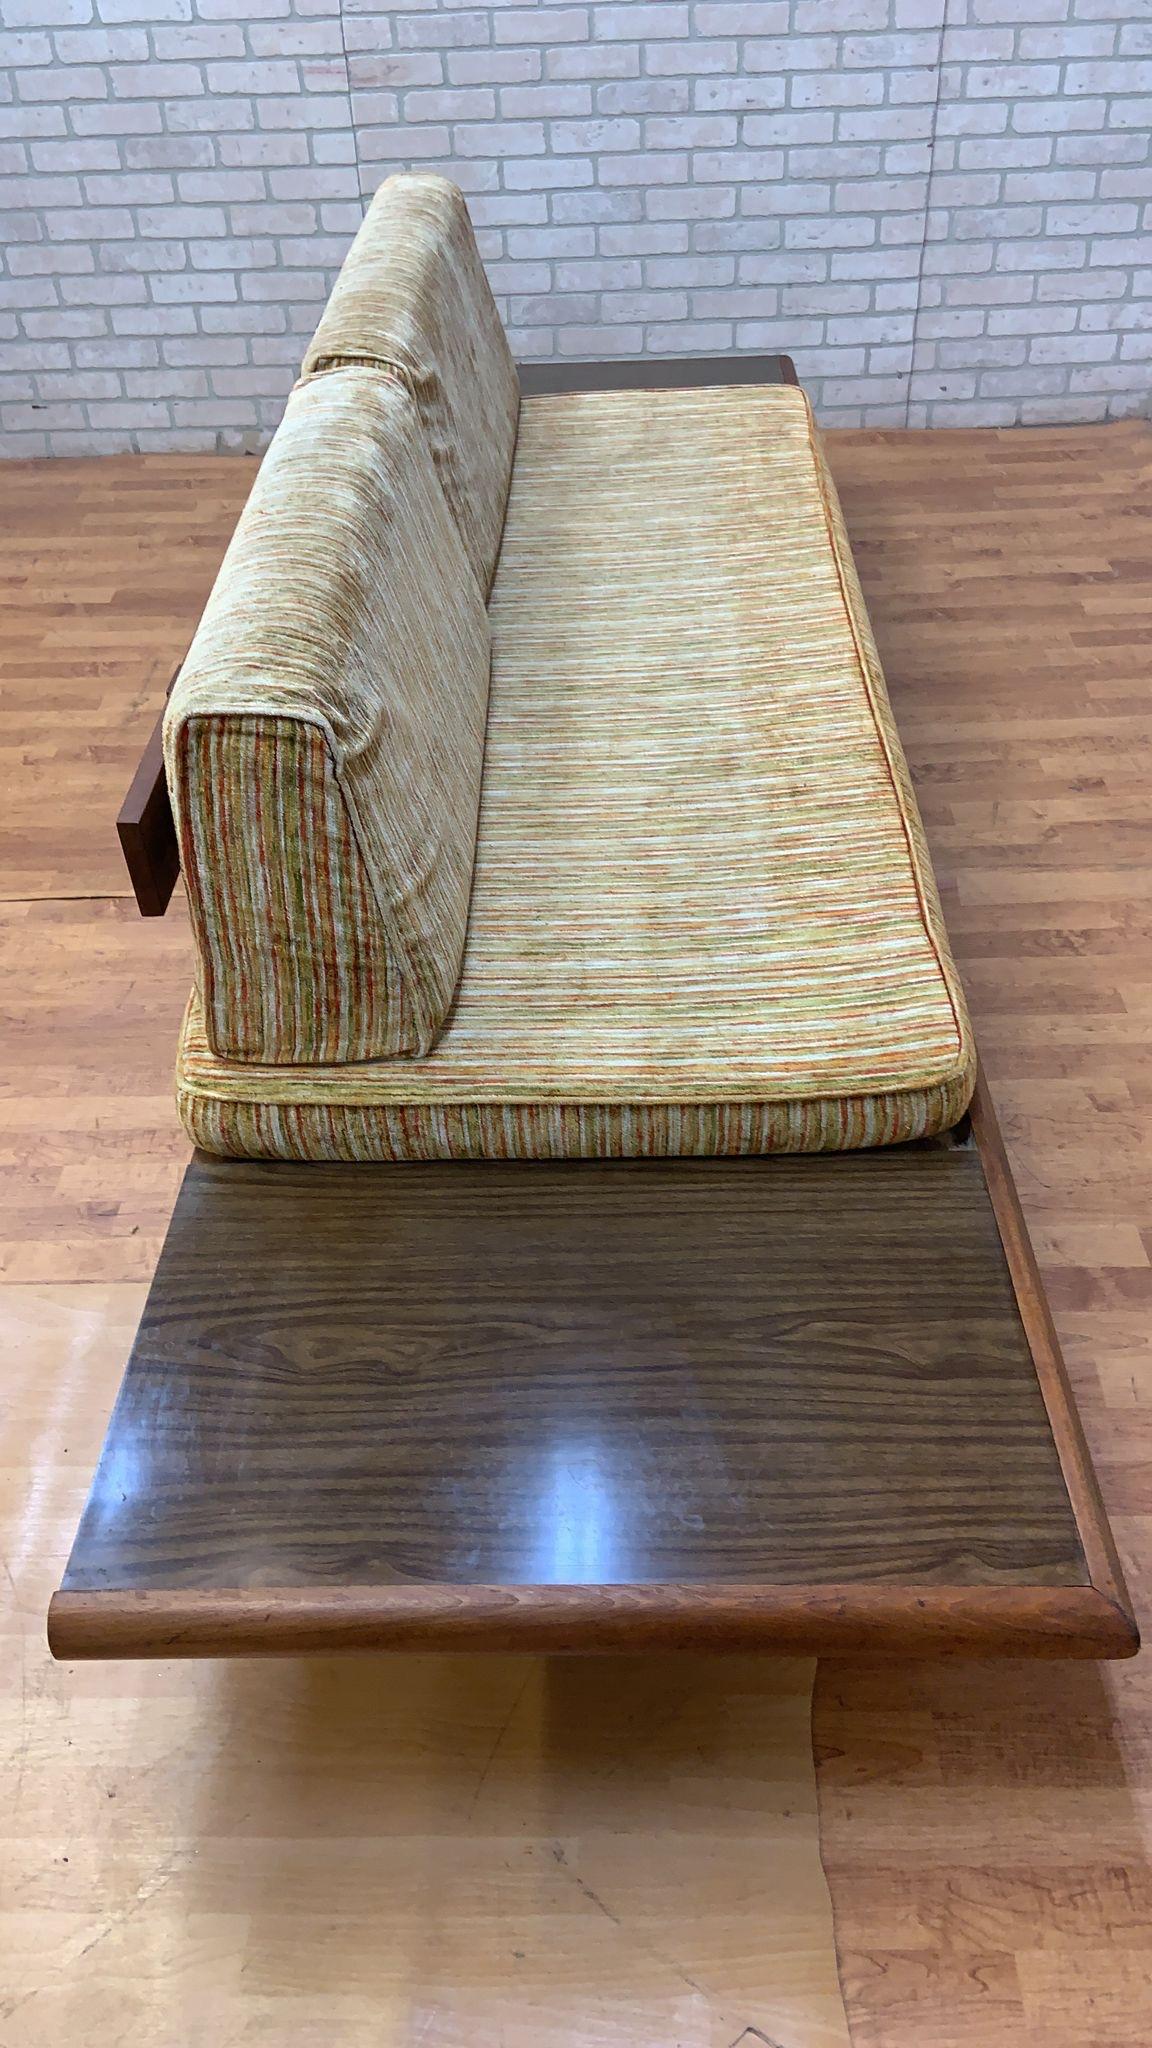 Hand-Crafted Mid Century Modern Adrian Pearsall Oak Daybed Sofa with Floating End Tables For Sale